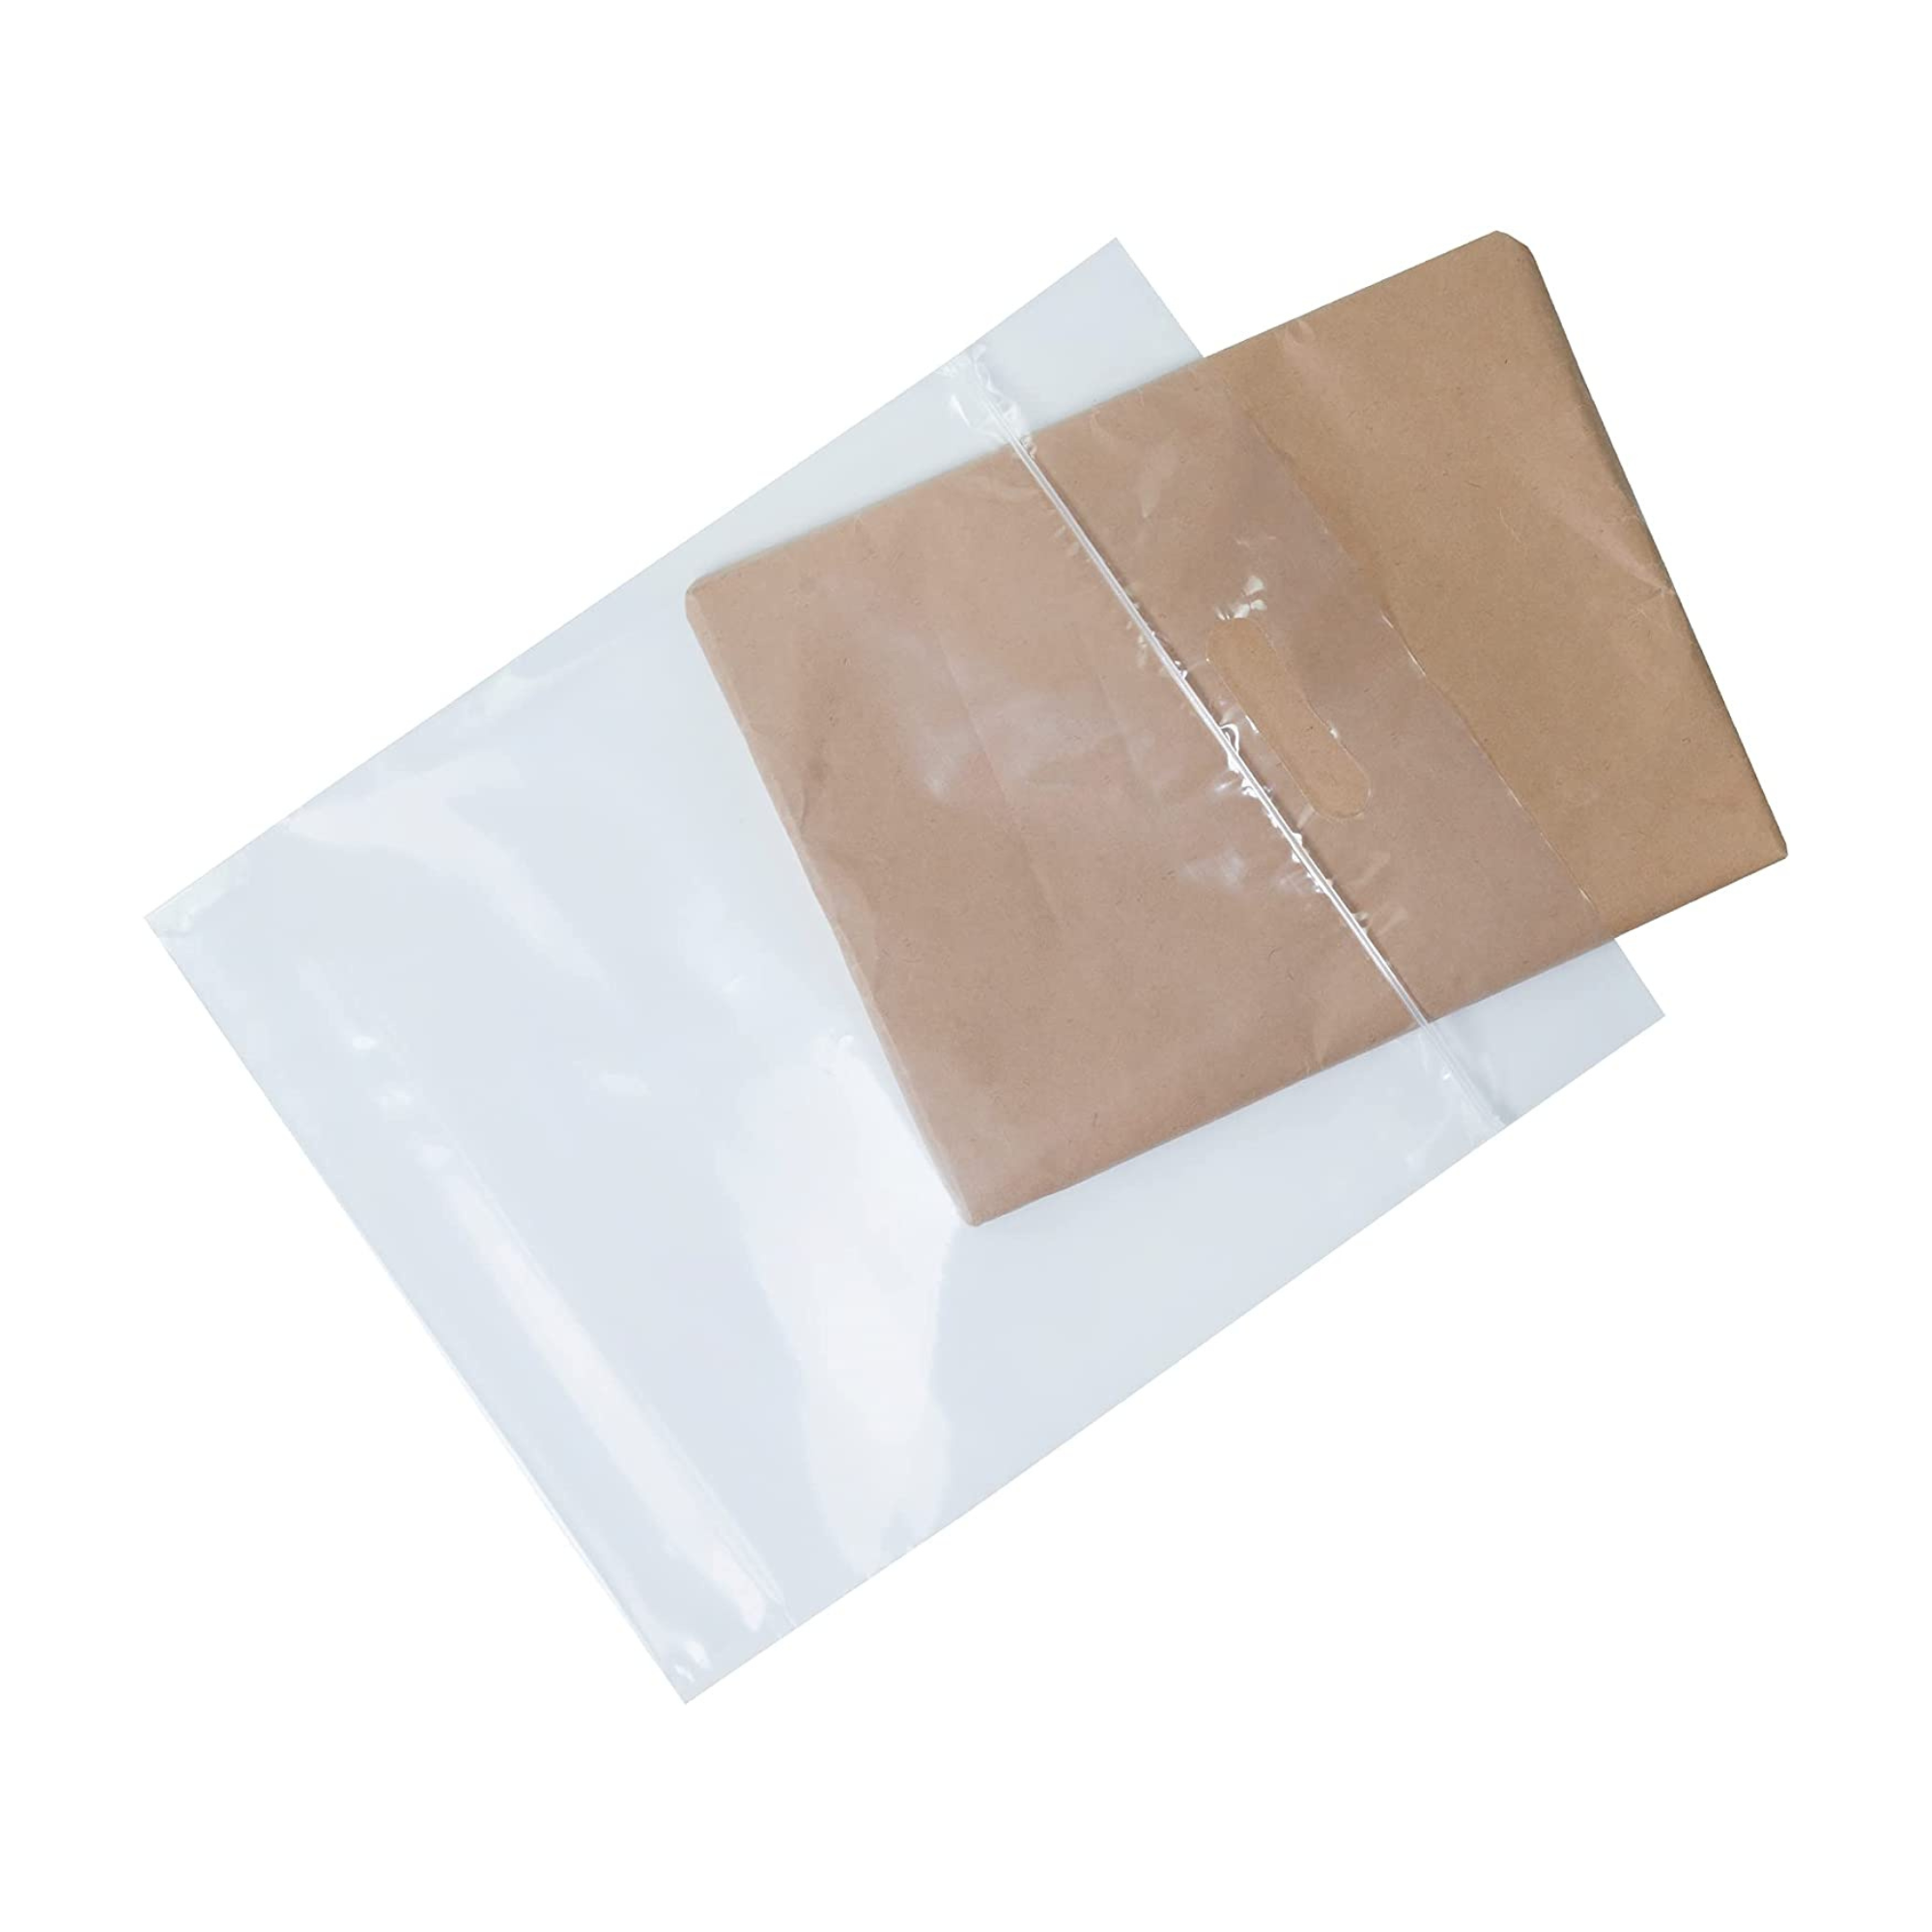 1 Gallon Zip Lock Handle Bags 12 x 12 3 Mil - NFL Approved